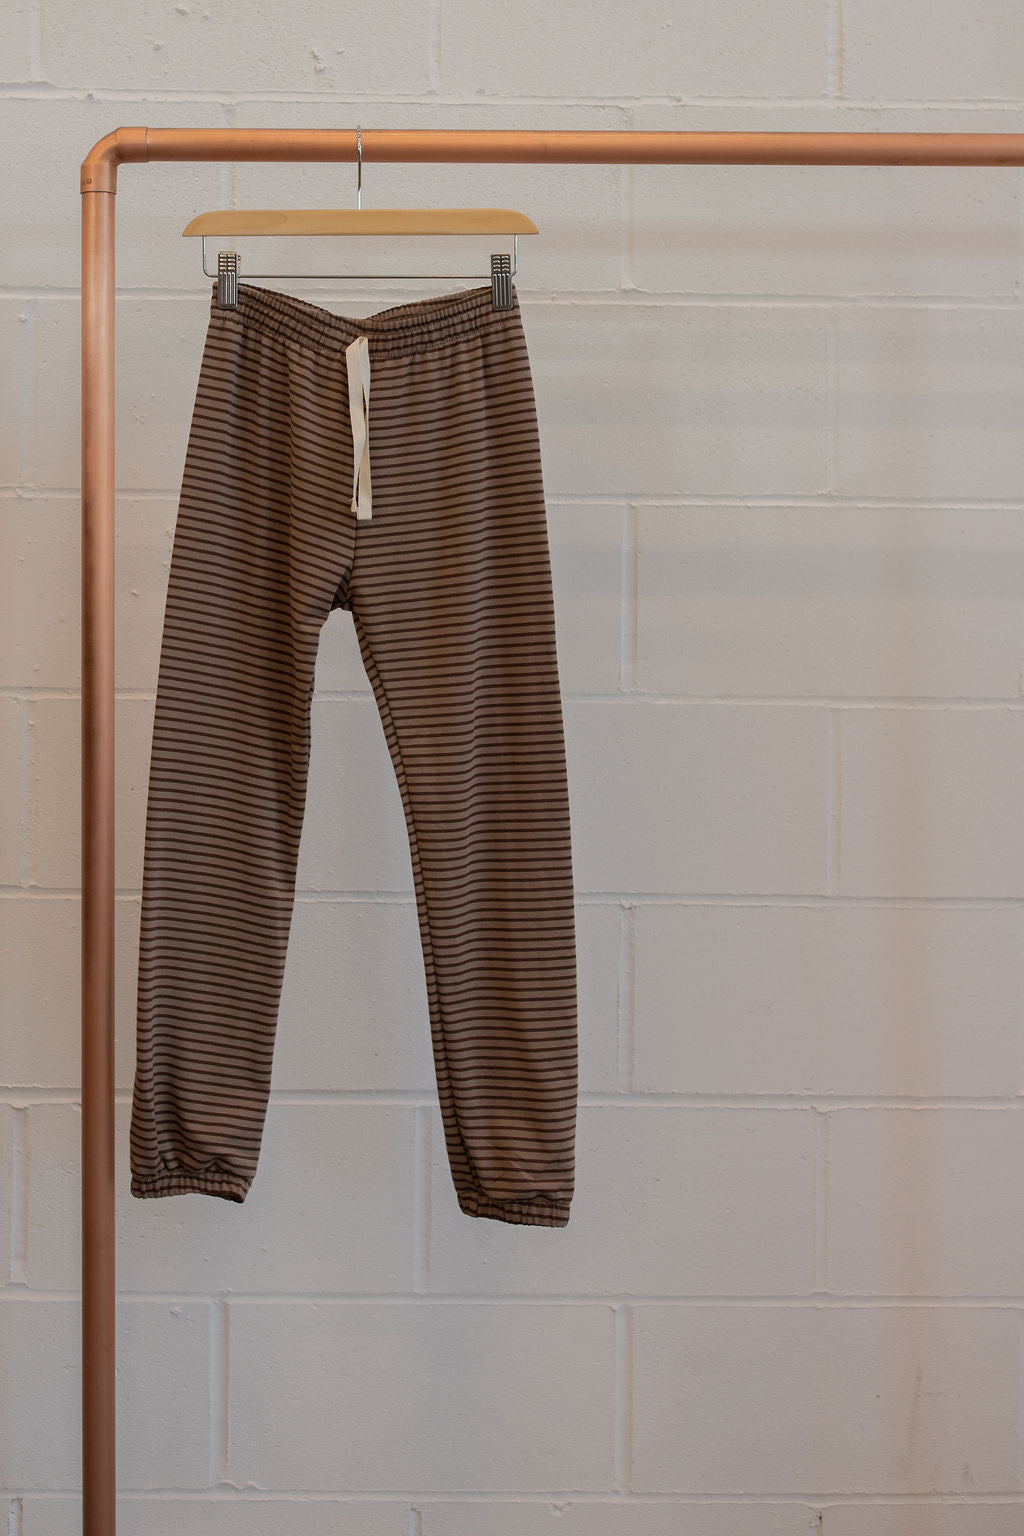 Back to Basics:  Youth Terry Sweatpants